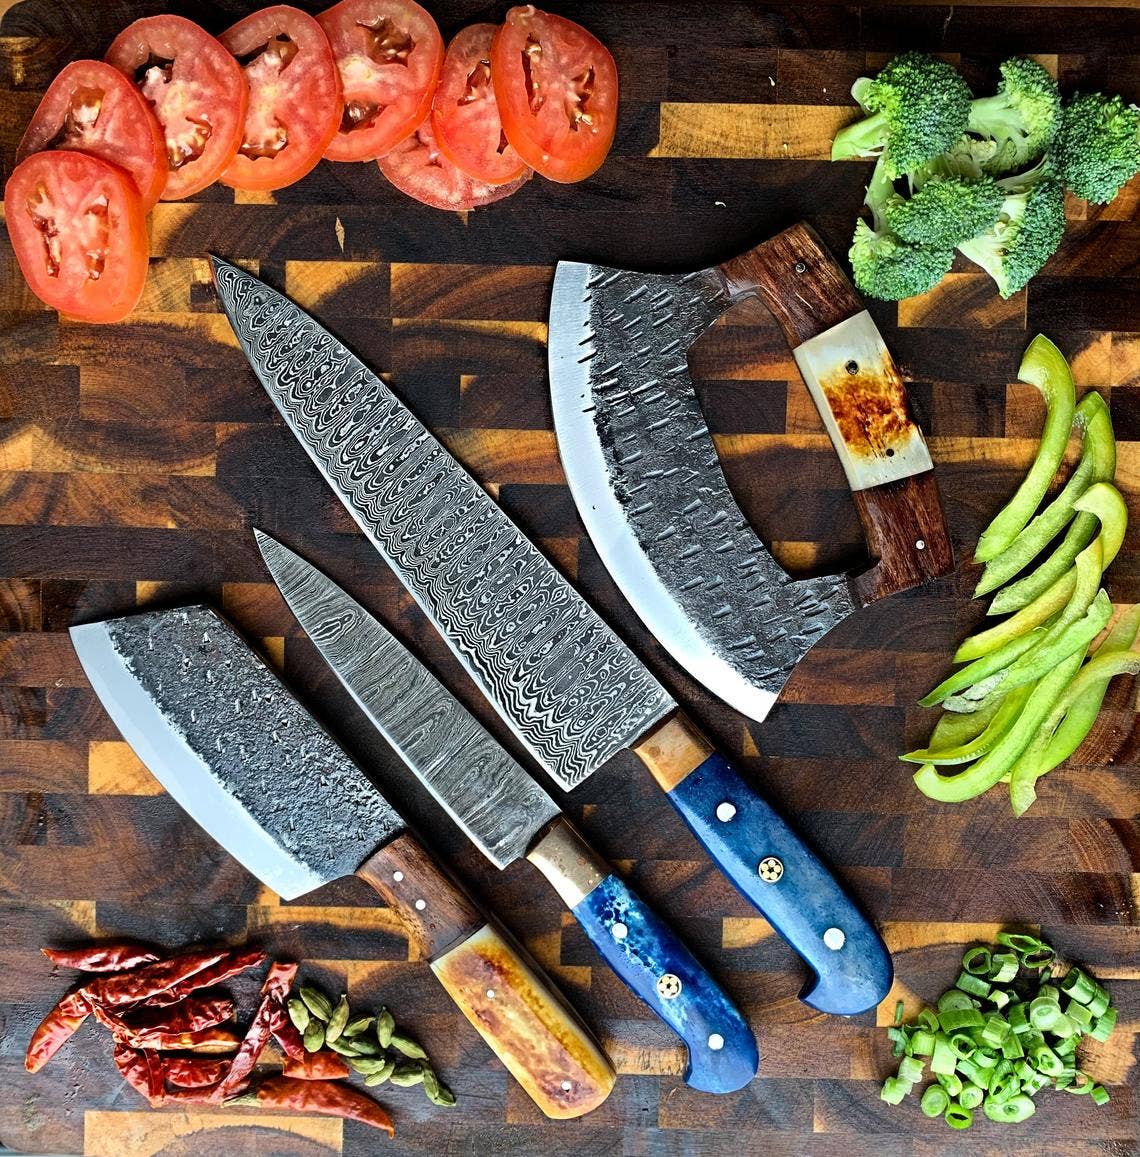 Imperial Steak Knife Set - High-Carbon Steel with Damascus